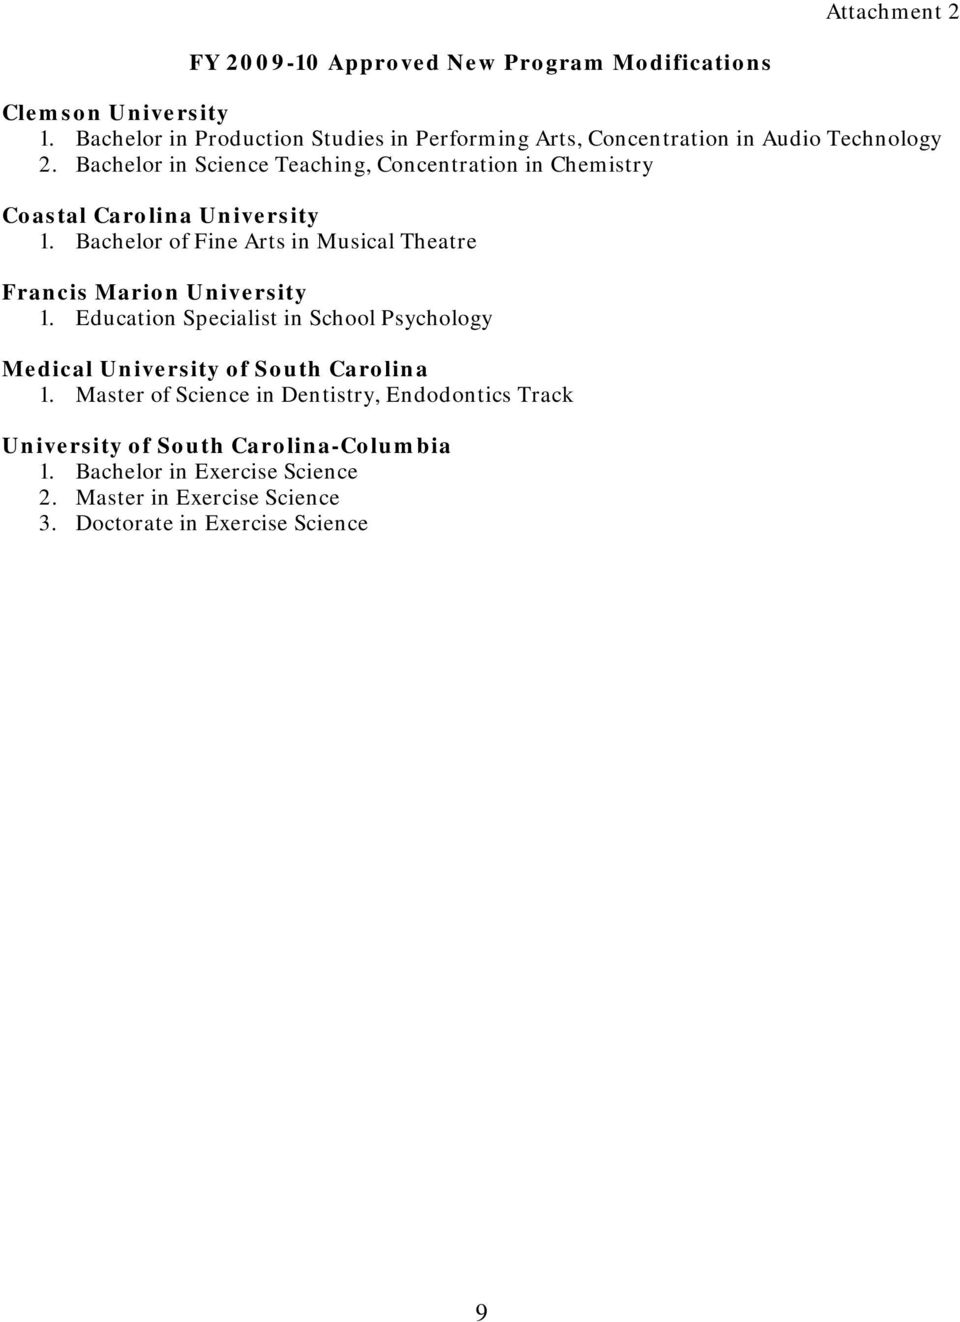 Bachelor in Science Teaching, Concentration in Chemistry Coastal Carolina University 1.